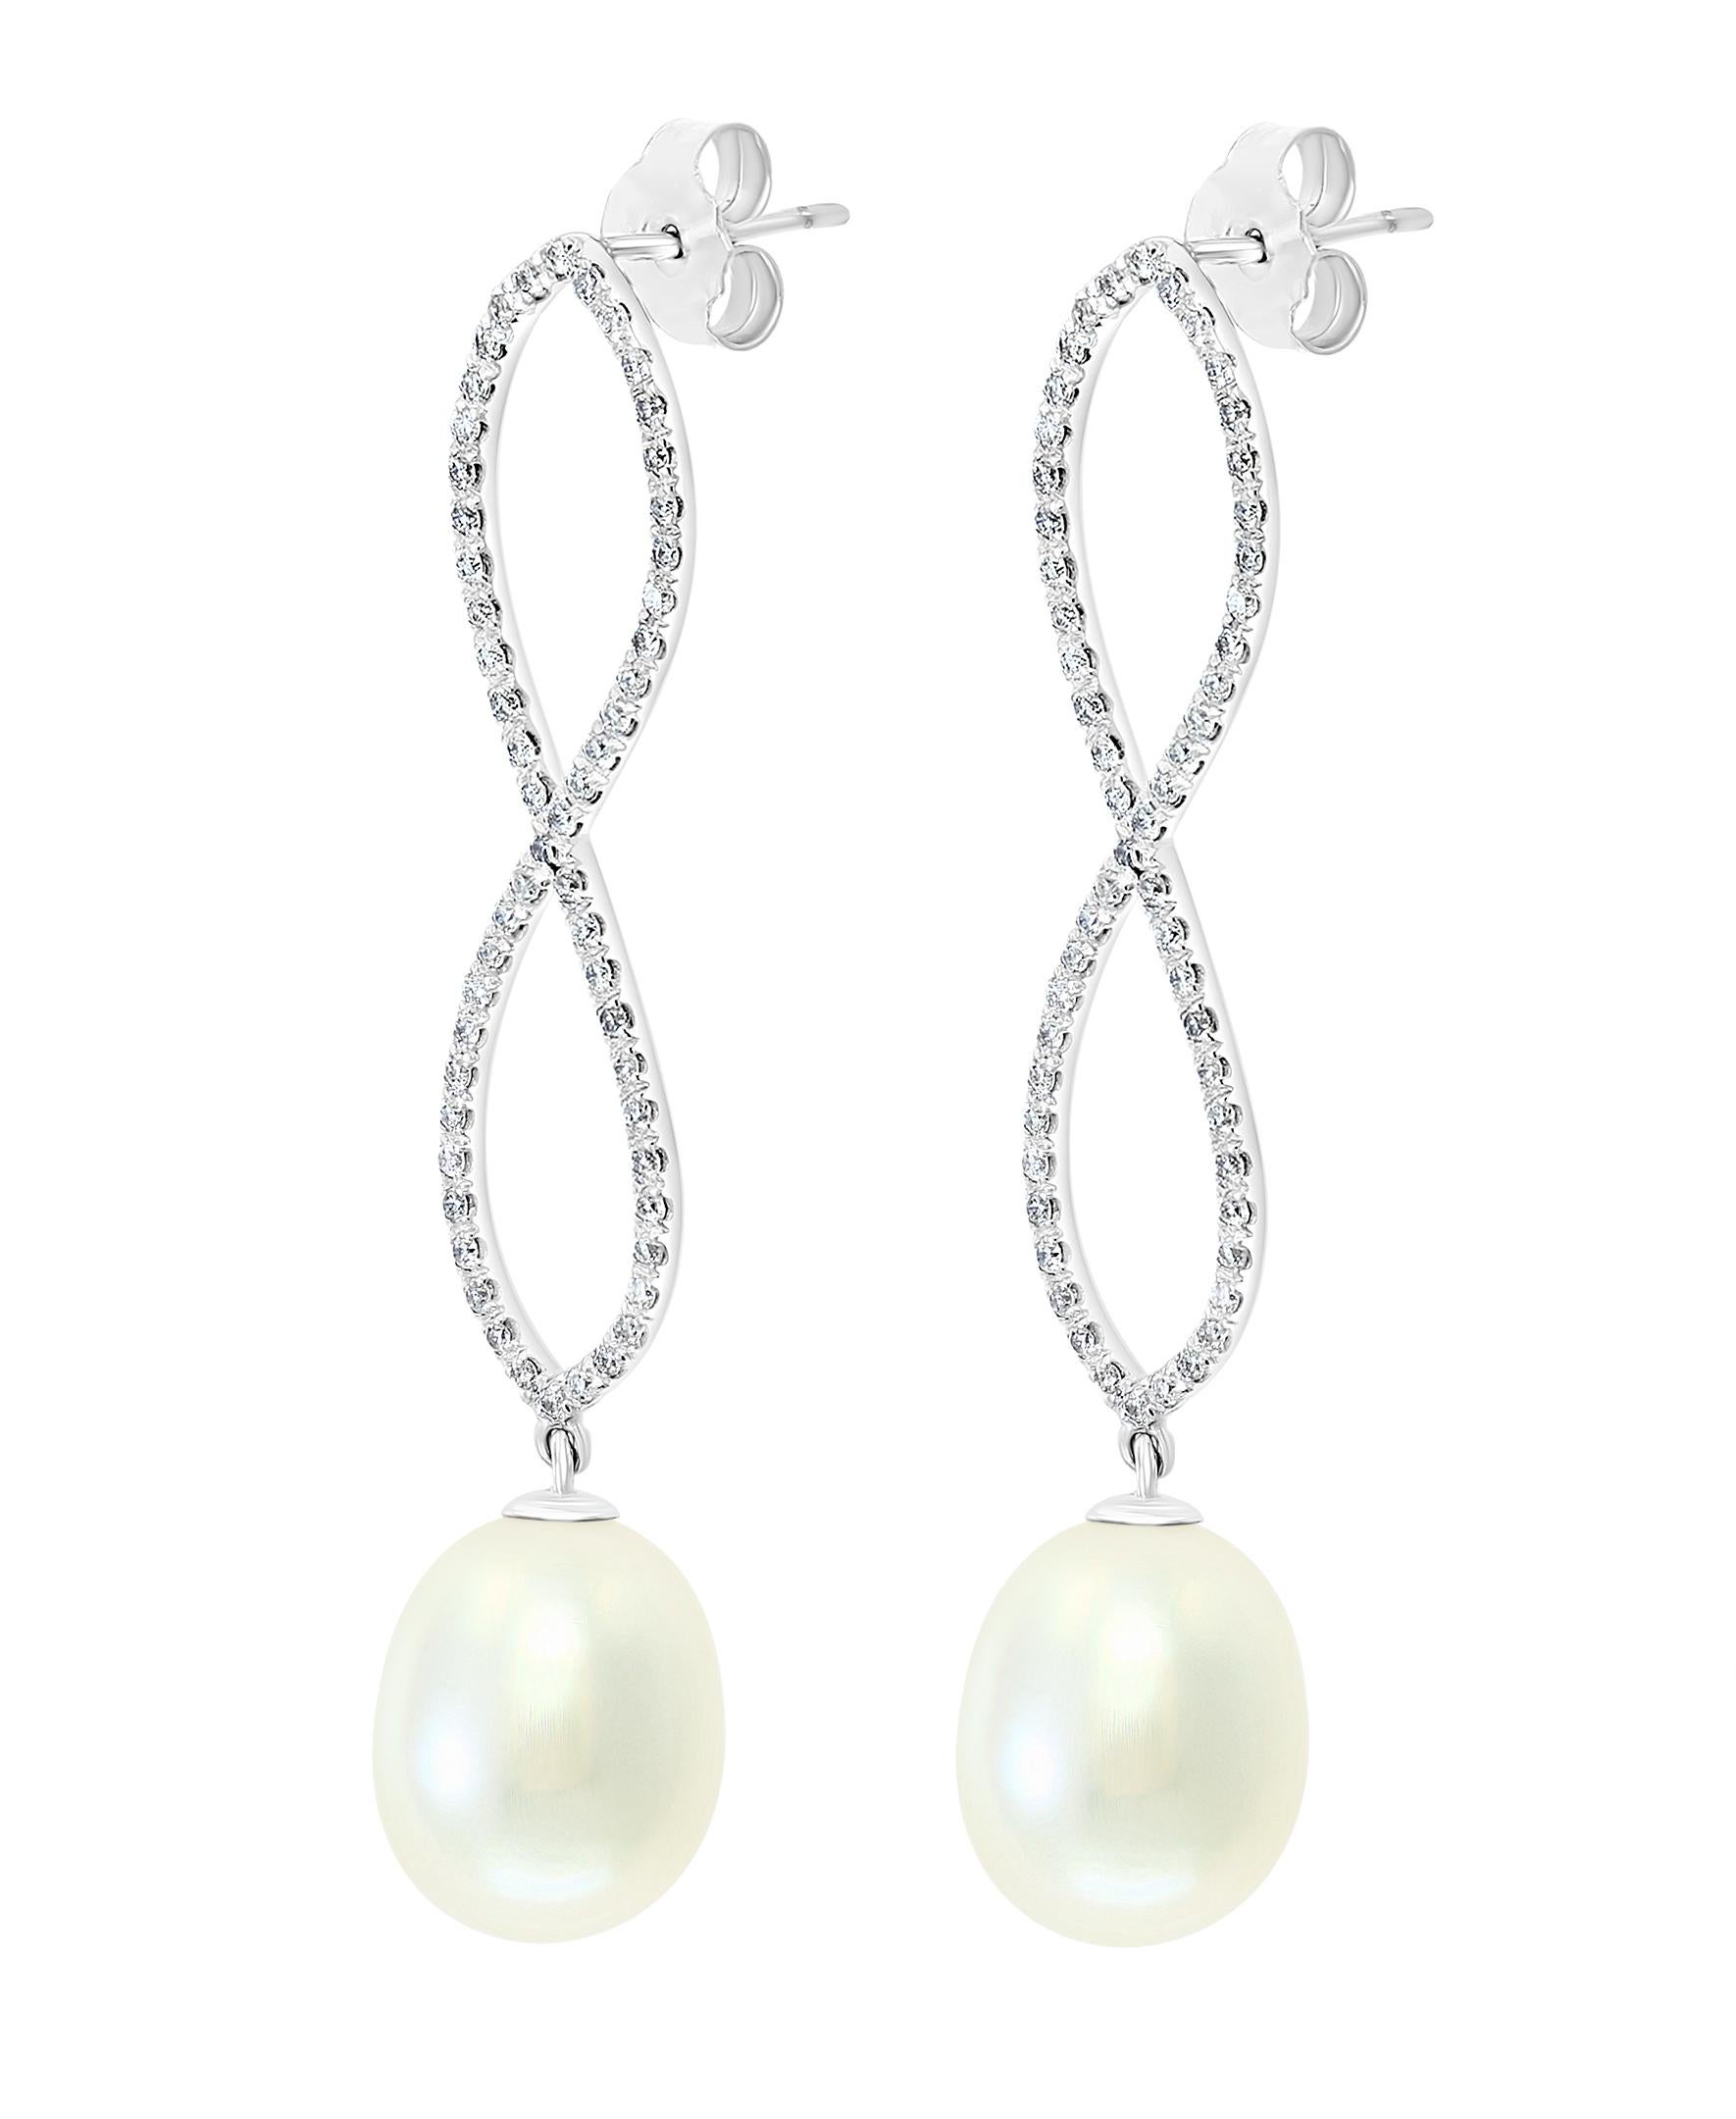 These elegant Diamond and Pearl earrings feature South Sea drop cultured pearls dangling gracefully from a white gold and diamond infinity setting. 
- 14K White Gold.
- 0.84 Carats of Diamonds. 
- Pearls measure 11.6x13.9mm